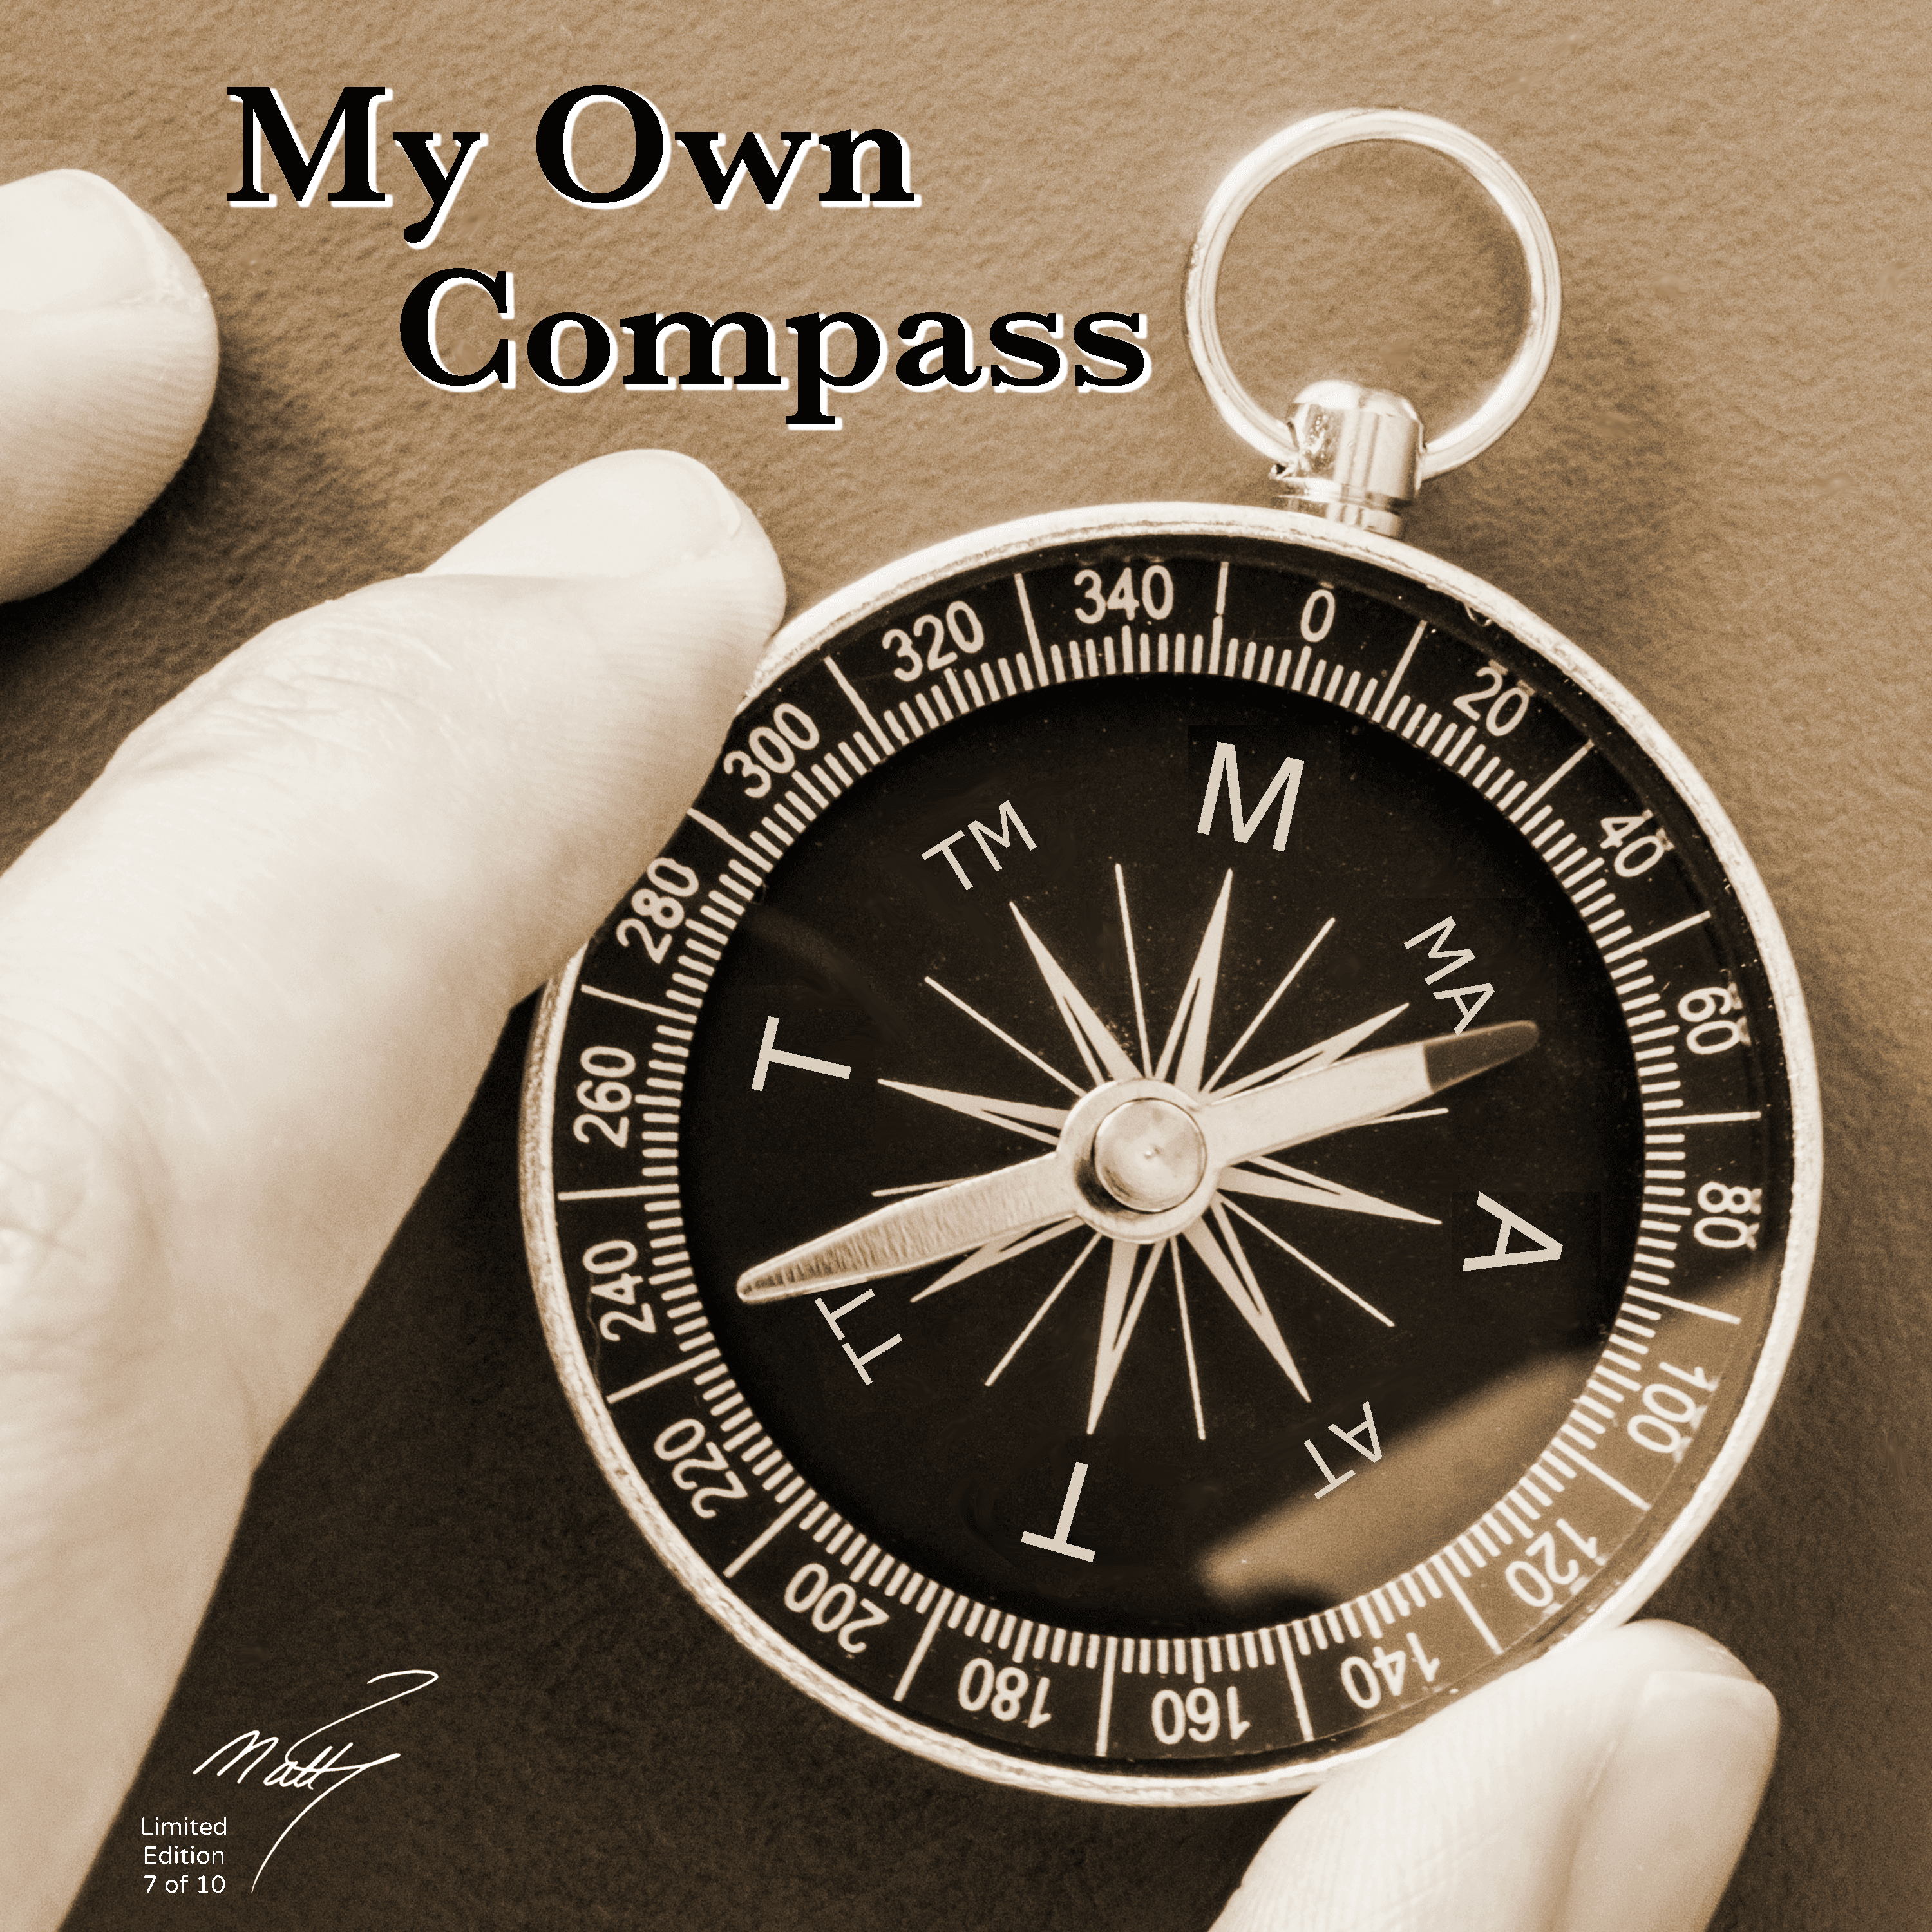 "My Own Compass" by Matt Johnson-Autographed Limited Edition (7 of 10)